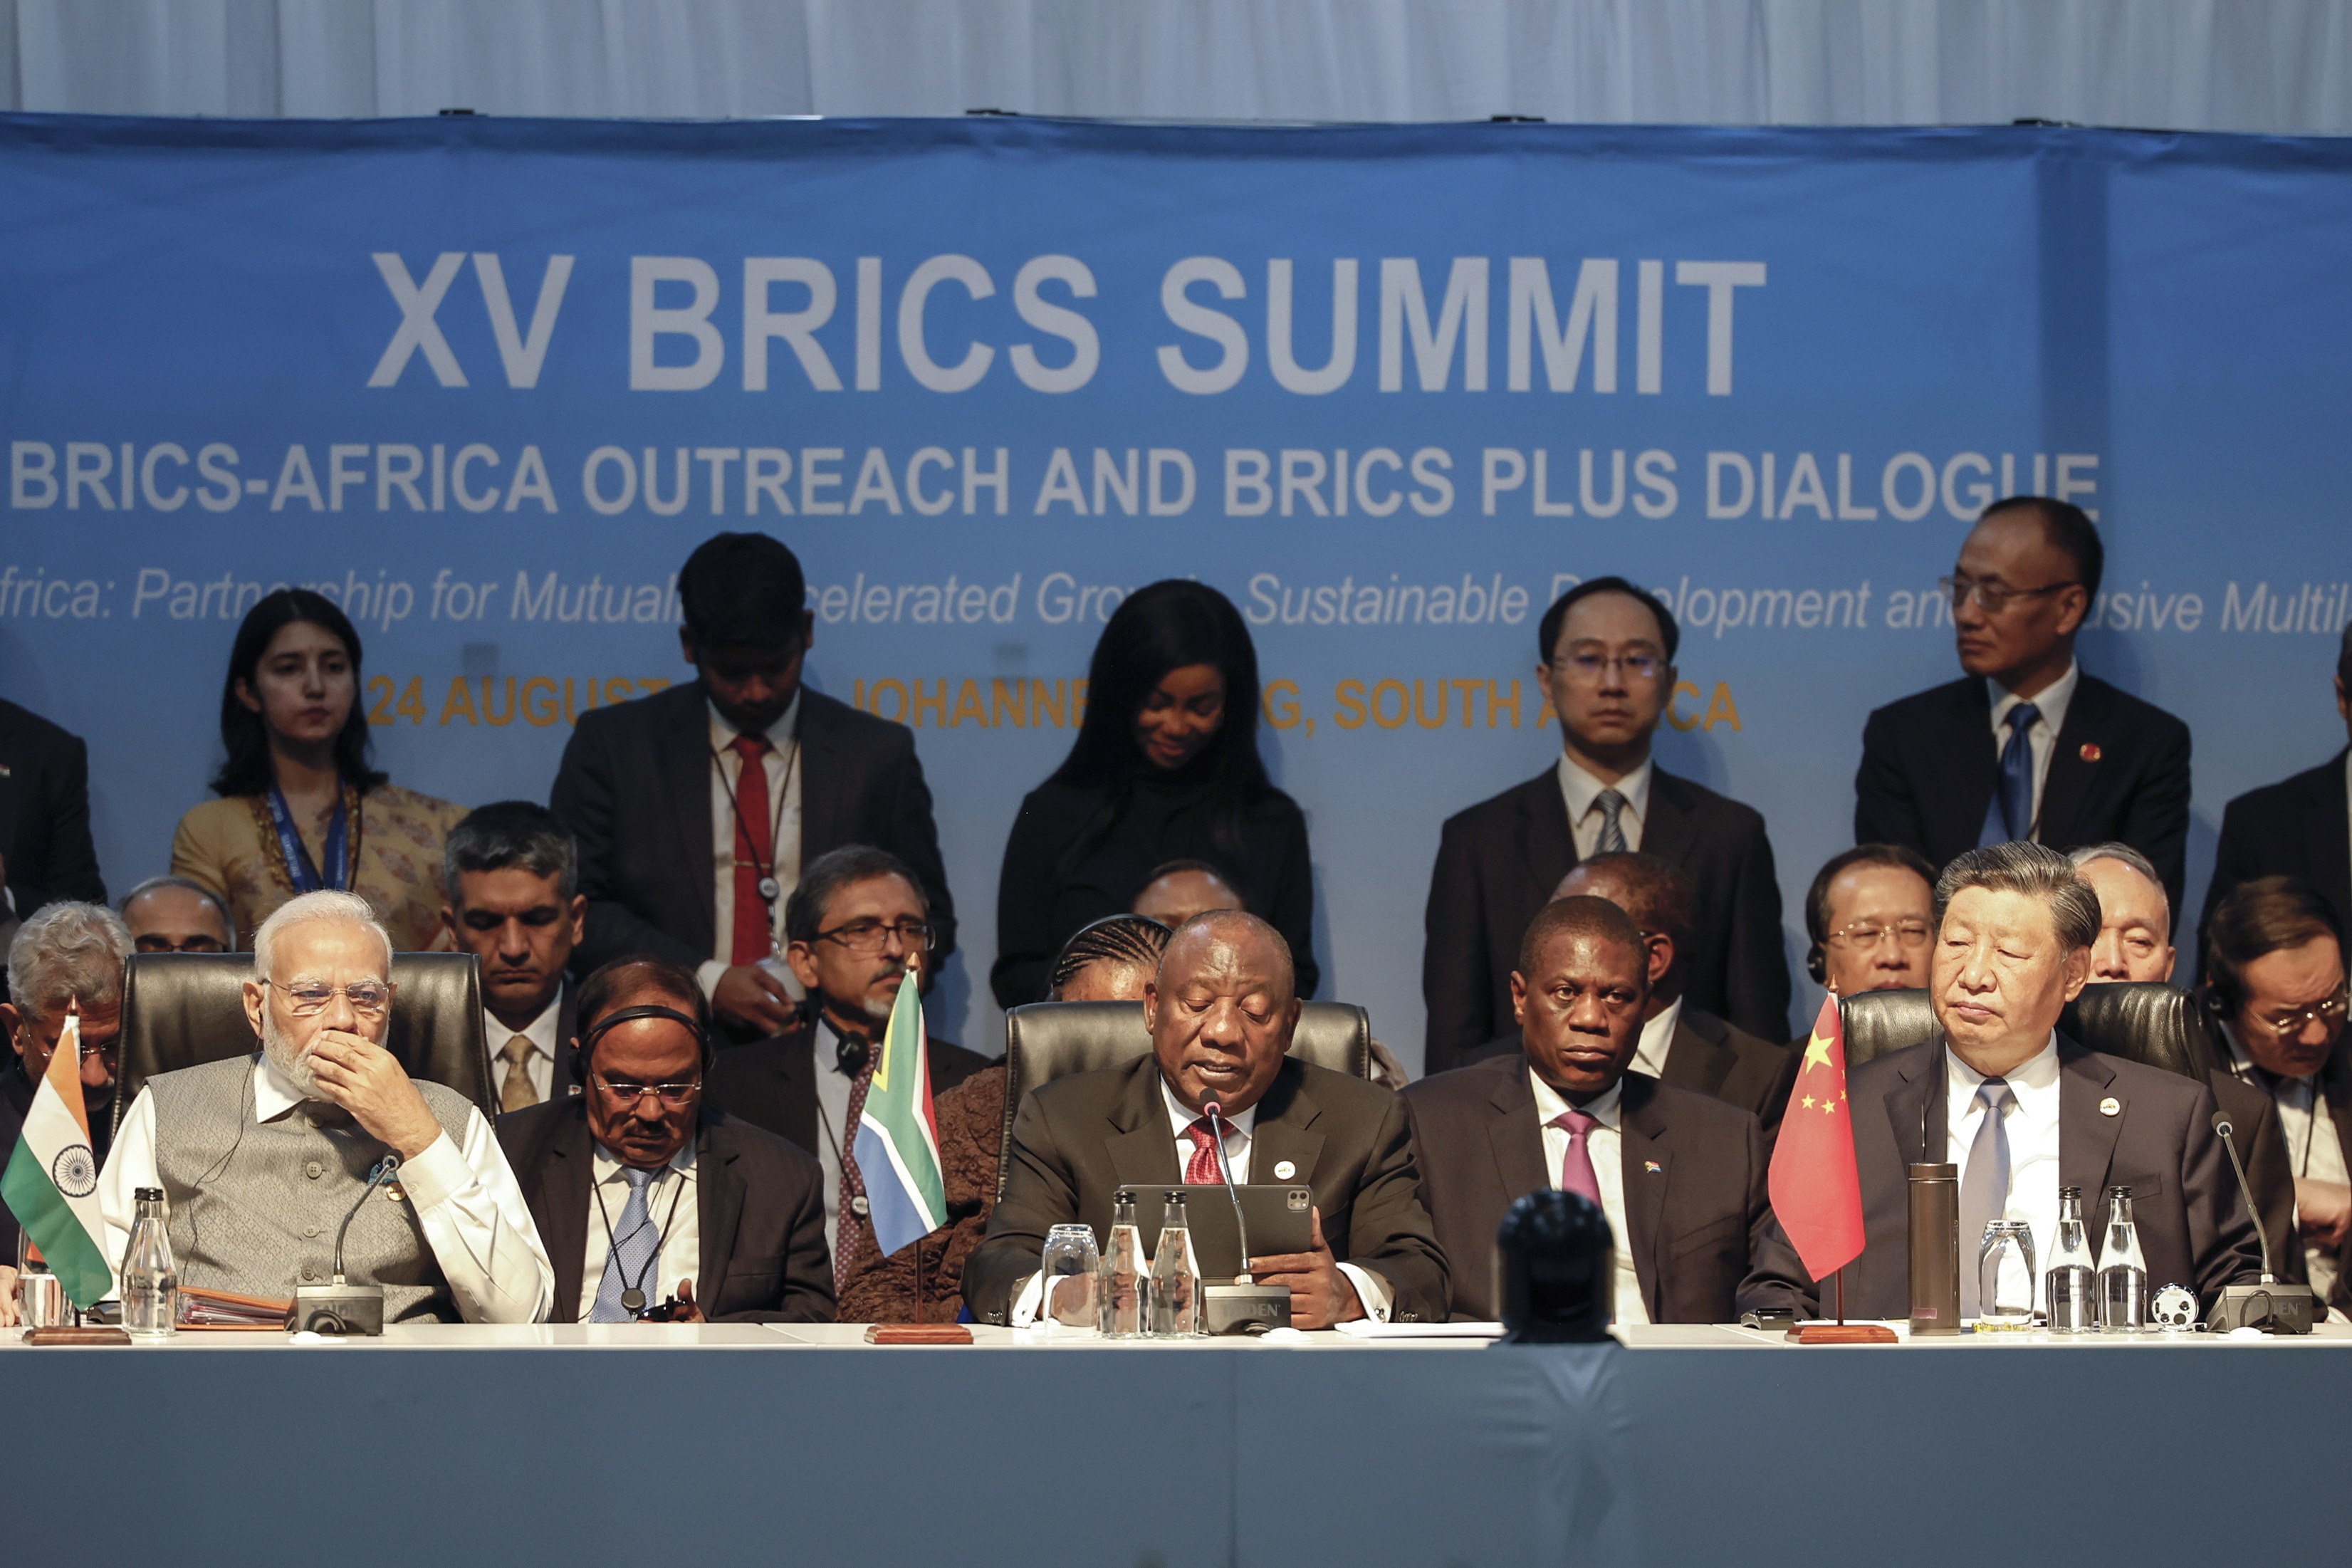 South African President Cyril Ramaphosa (front, centre) is flanked by Indian Prime Minister Narendra Modi (front, left) and Chinese President Xi Jinping (front, right) at the 15th Brics Summit in Johannesburg, South Africa, on August 24, where Global South countries pushed for “true multilateralism”. Photo: EPA-EFE